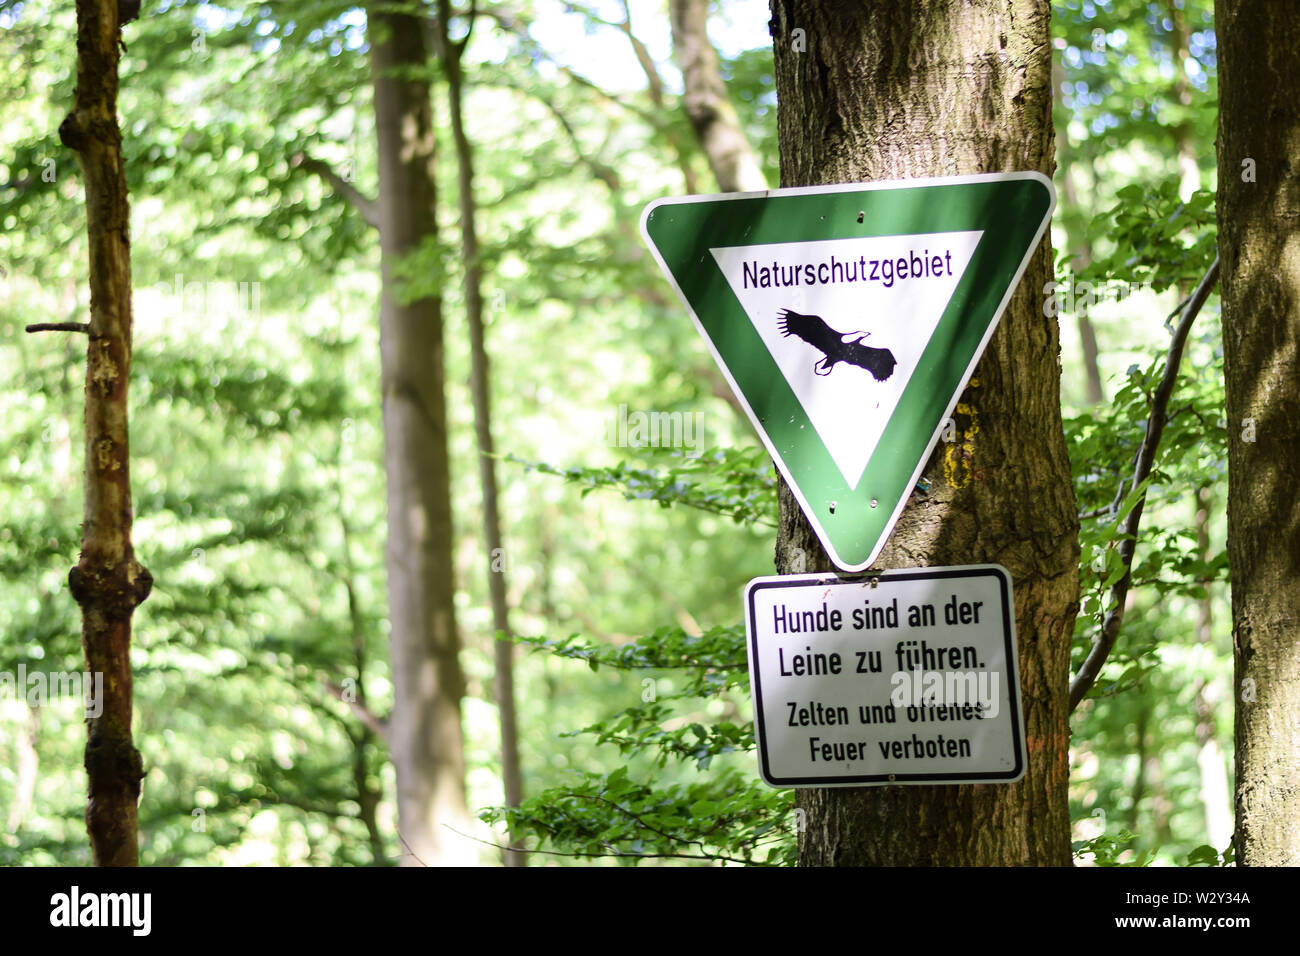 German sign saying Naturschutzgebiet (English meaning: nature reserve) for protected landscape - Hinweisschild Stock Photo